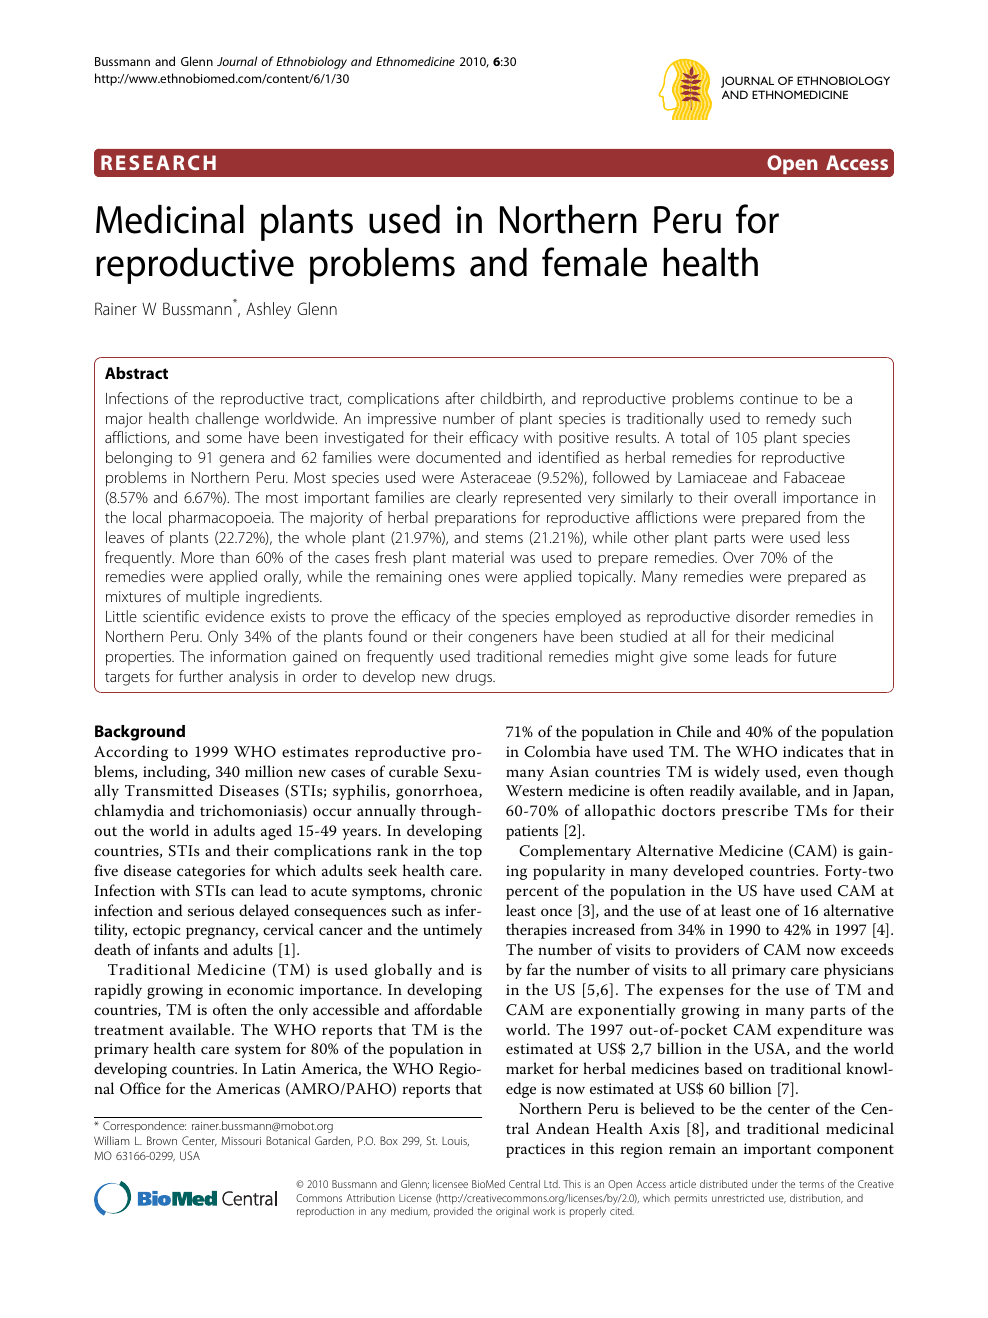 Medicinal Plants Used In Northern Peru For Reproductive Problems